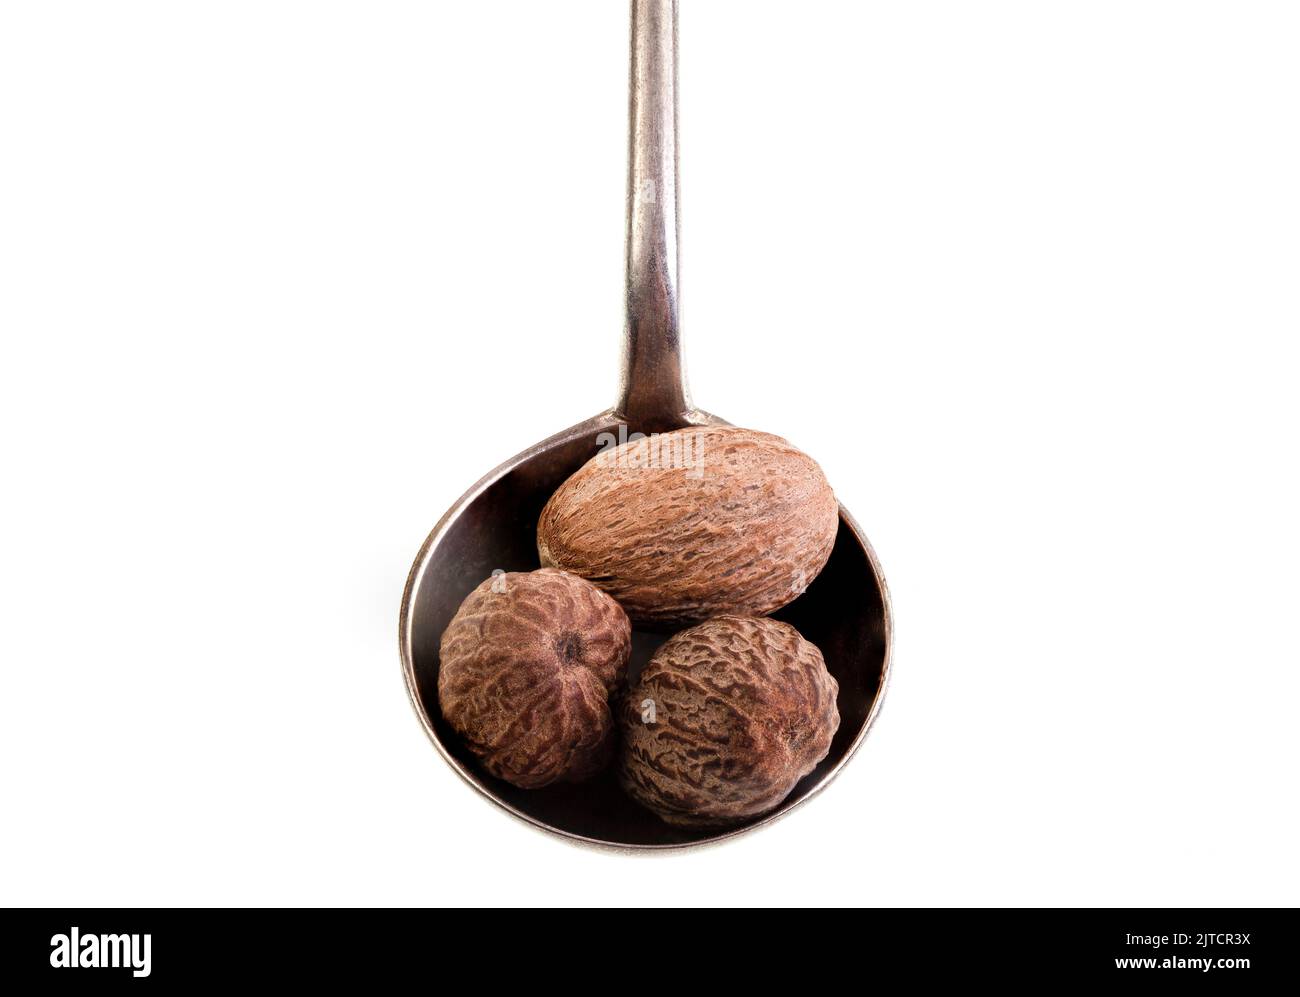 Nutmeg is the spice made by grinding the seed kernels of the fragrant nutmeg tree, Myristica fragrans, and used in many savory and sweet dishes Stock Photo